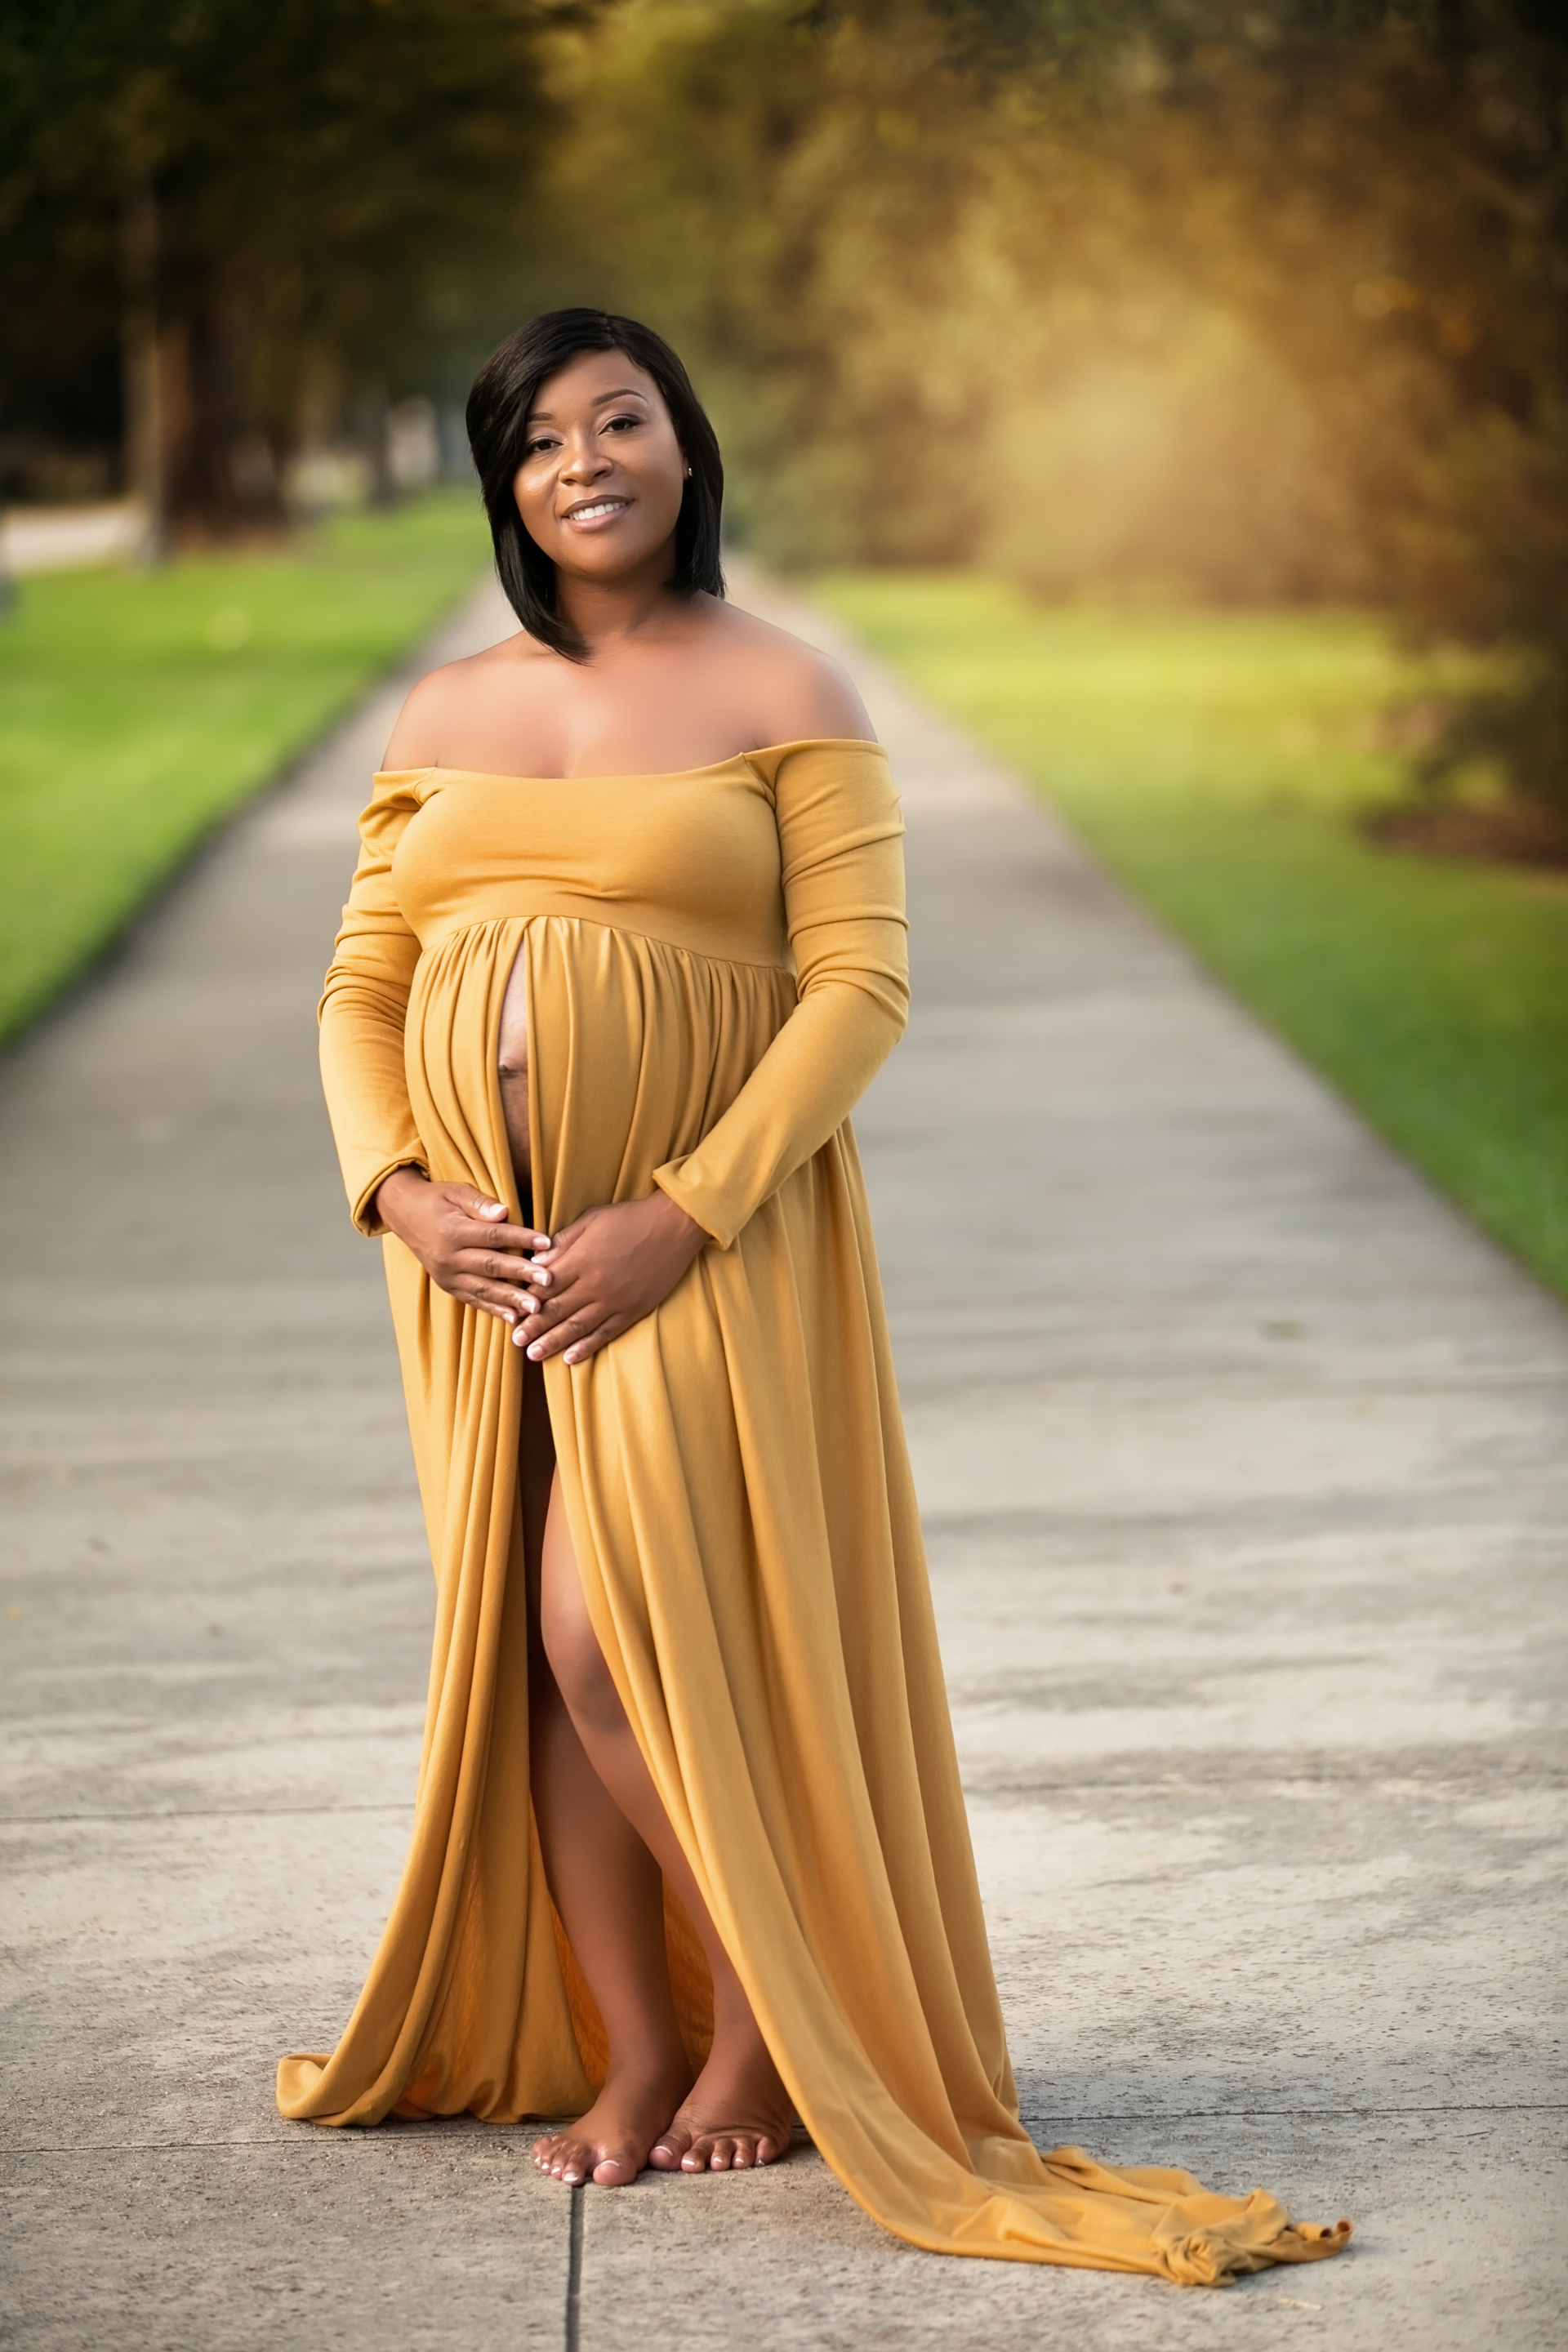 Image result for maternity photoshoot dress